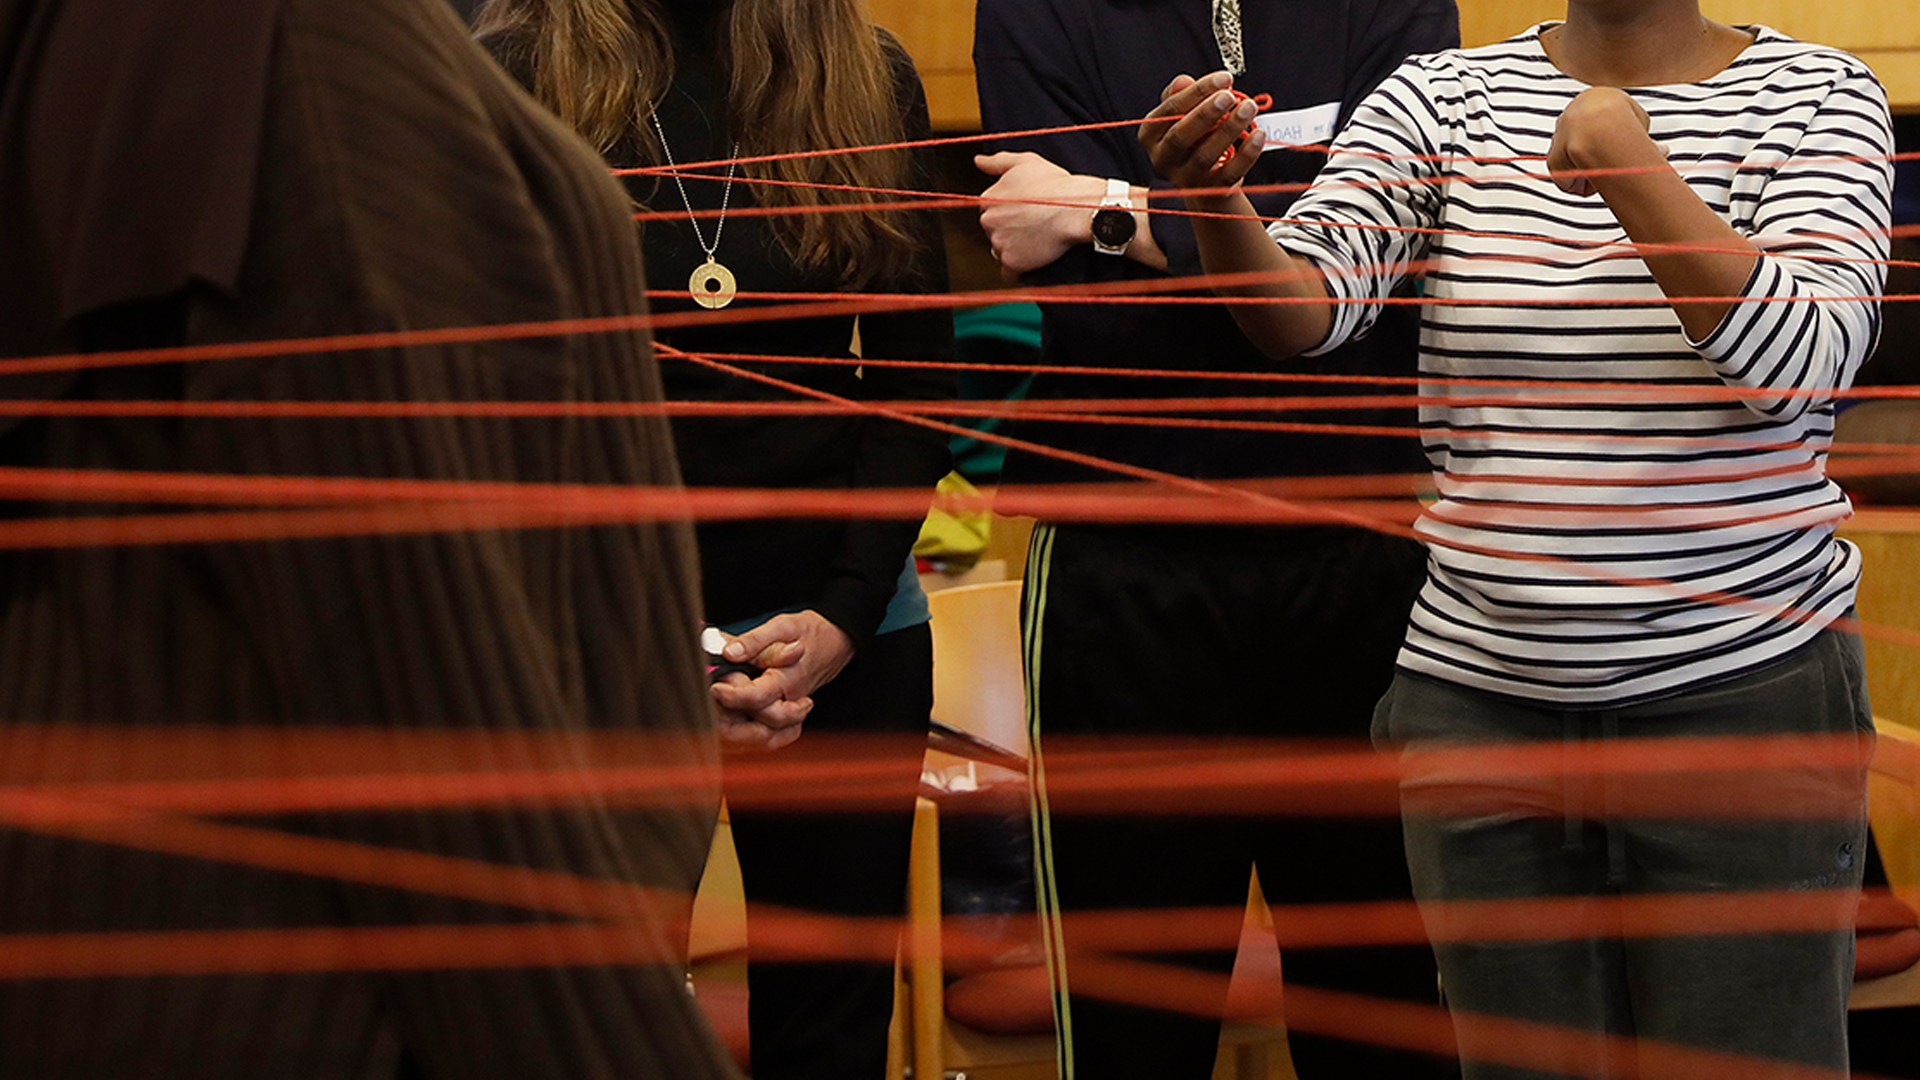 Red string crosses the image in the foreground with people in the background handling it